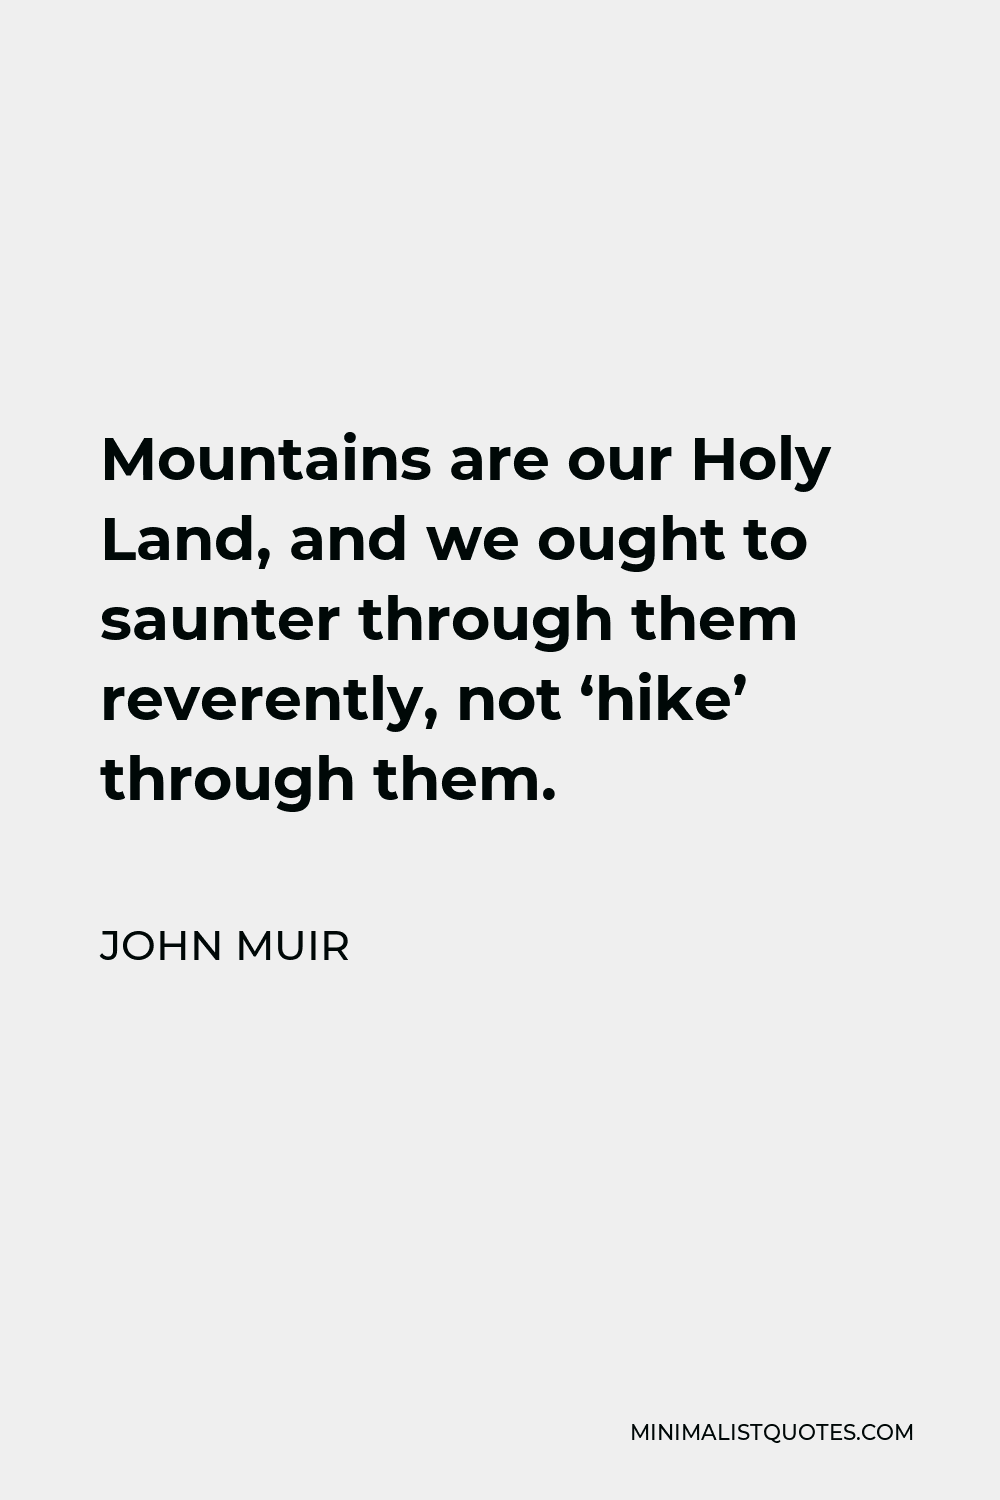 John Muir Quote - Mountains are our Holy Land, and we ought to saunter through them reverently, not ‘hike’ through them.